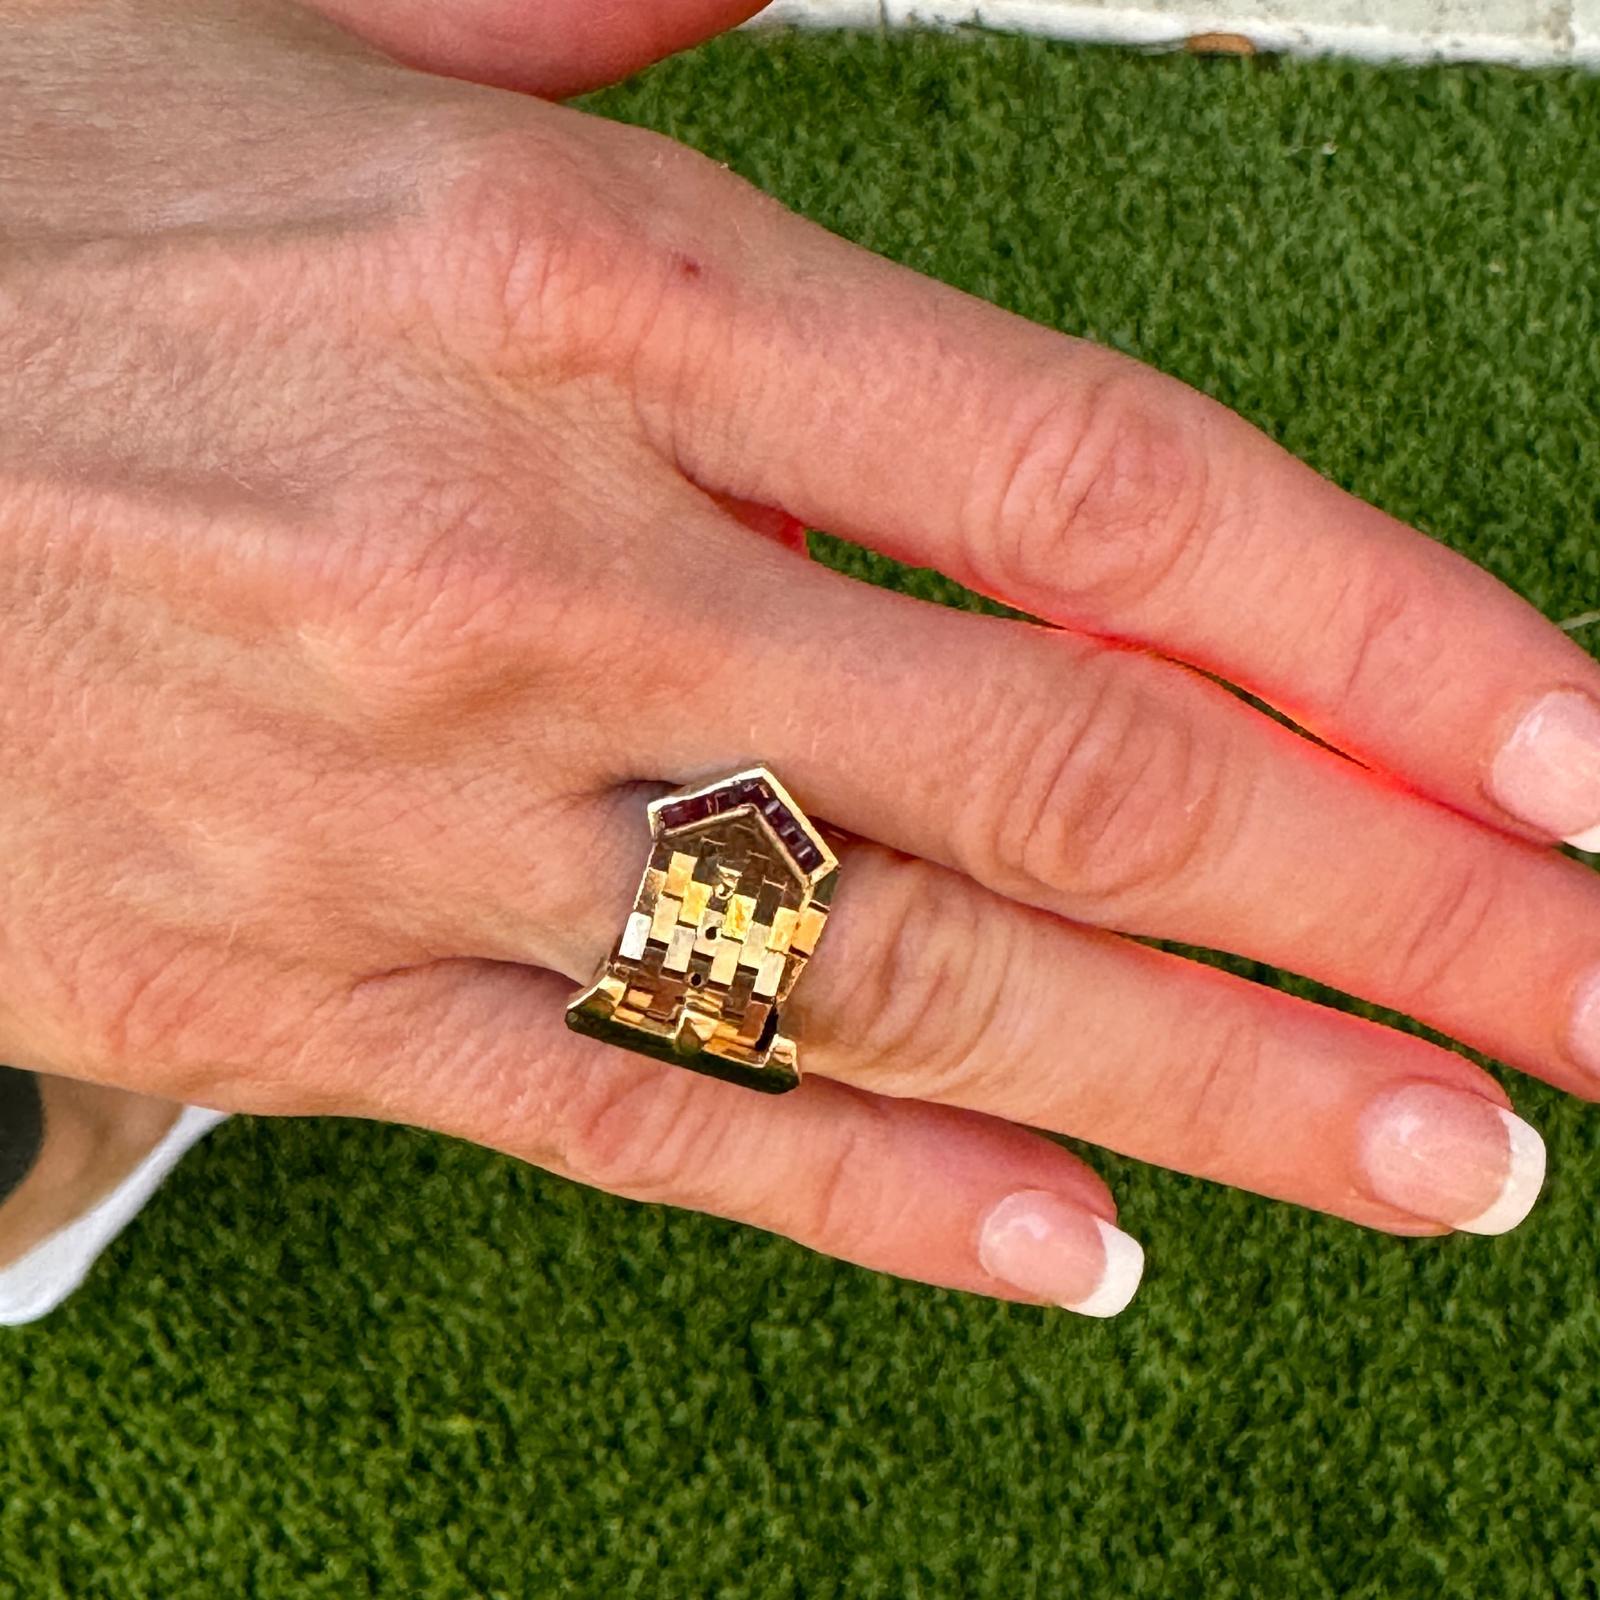 Fabulous Retro buckle ring handcrafted in 14 karat yellow gold. The adjustable ring was crafted with small links, and features ruby accents on the buckle. The ring measures 10mm in width (15mm at the buckle), and can fit ring size 4-10. Weight: 10.9